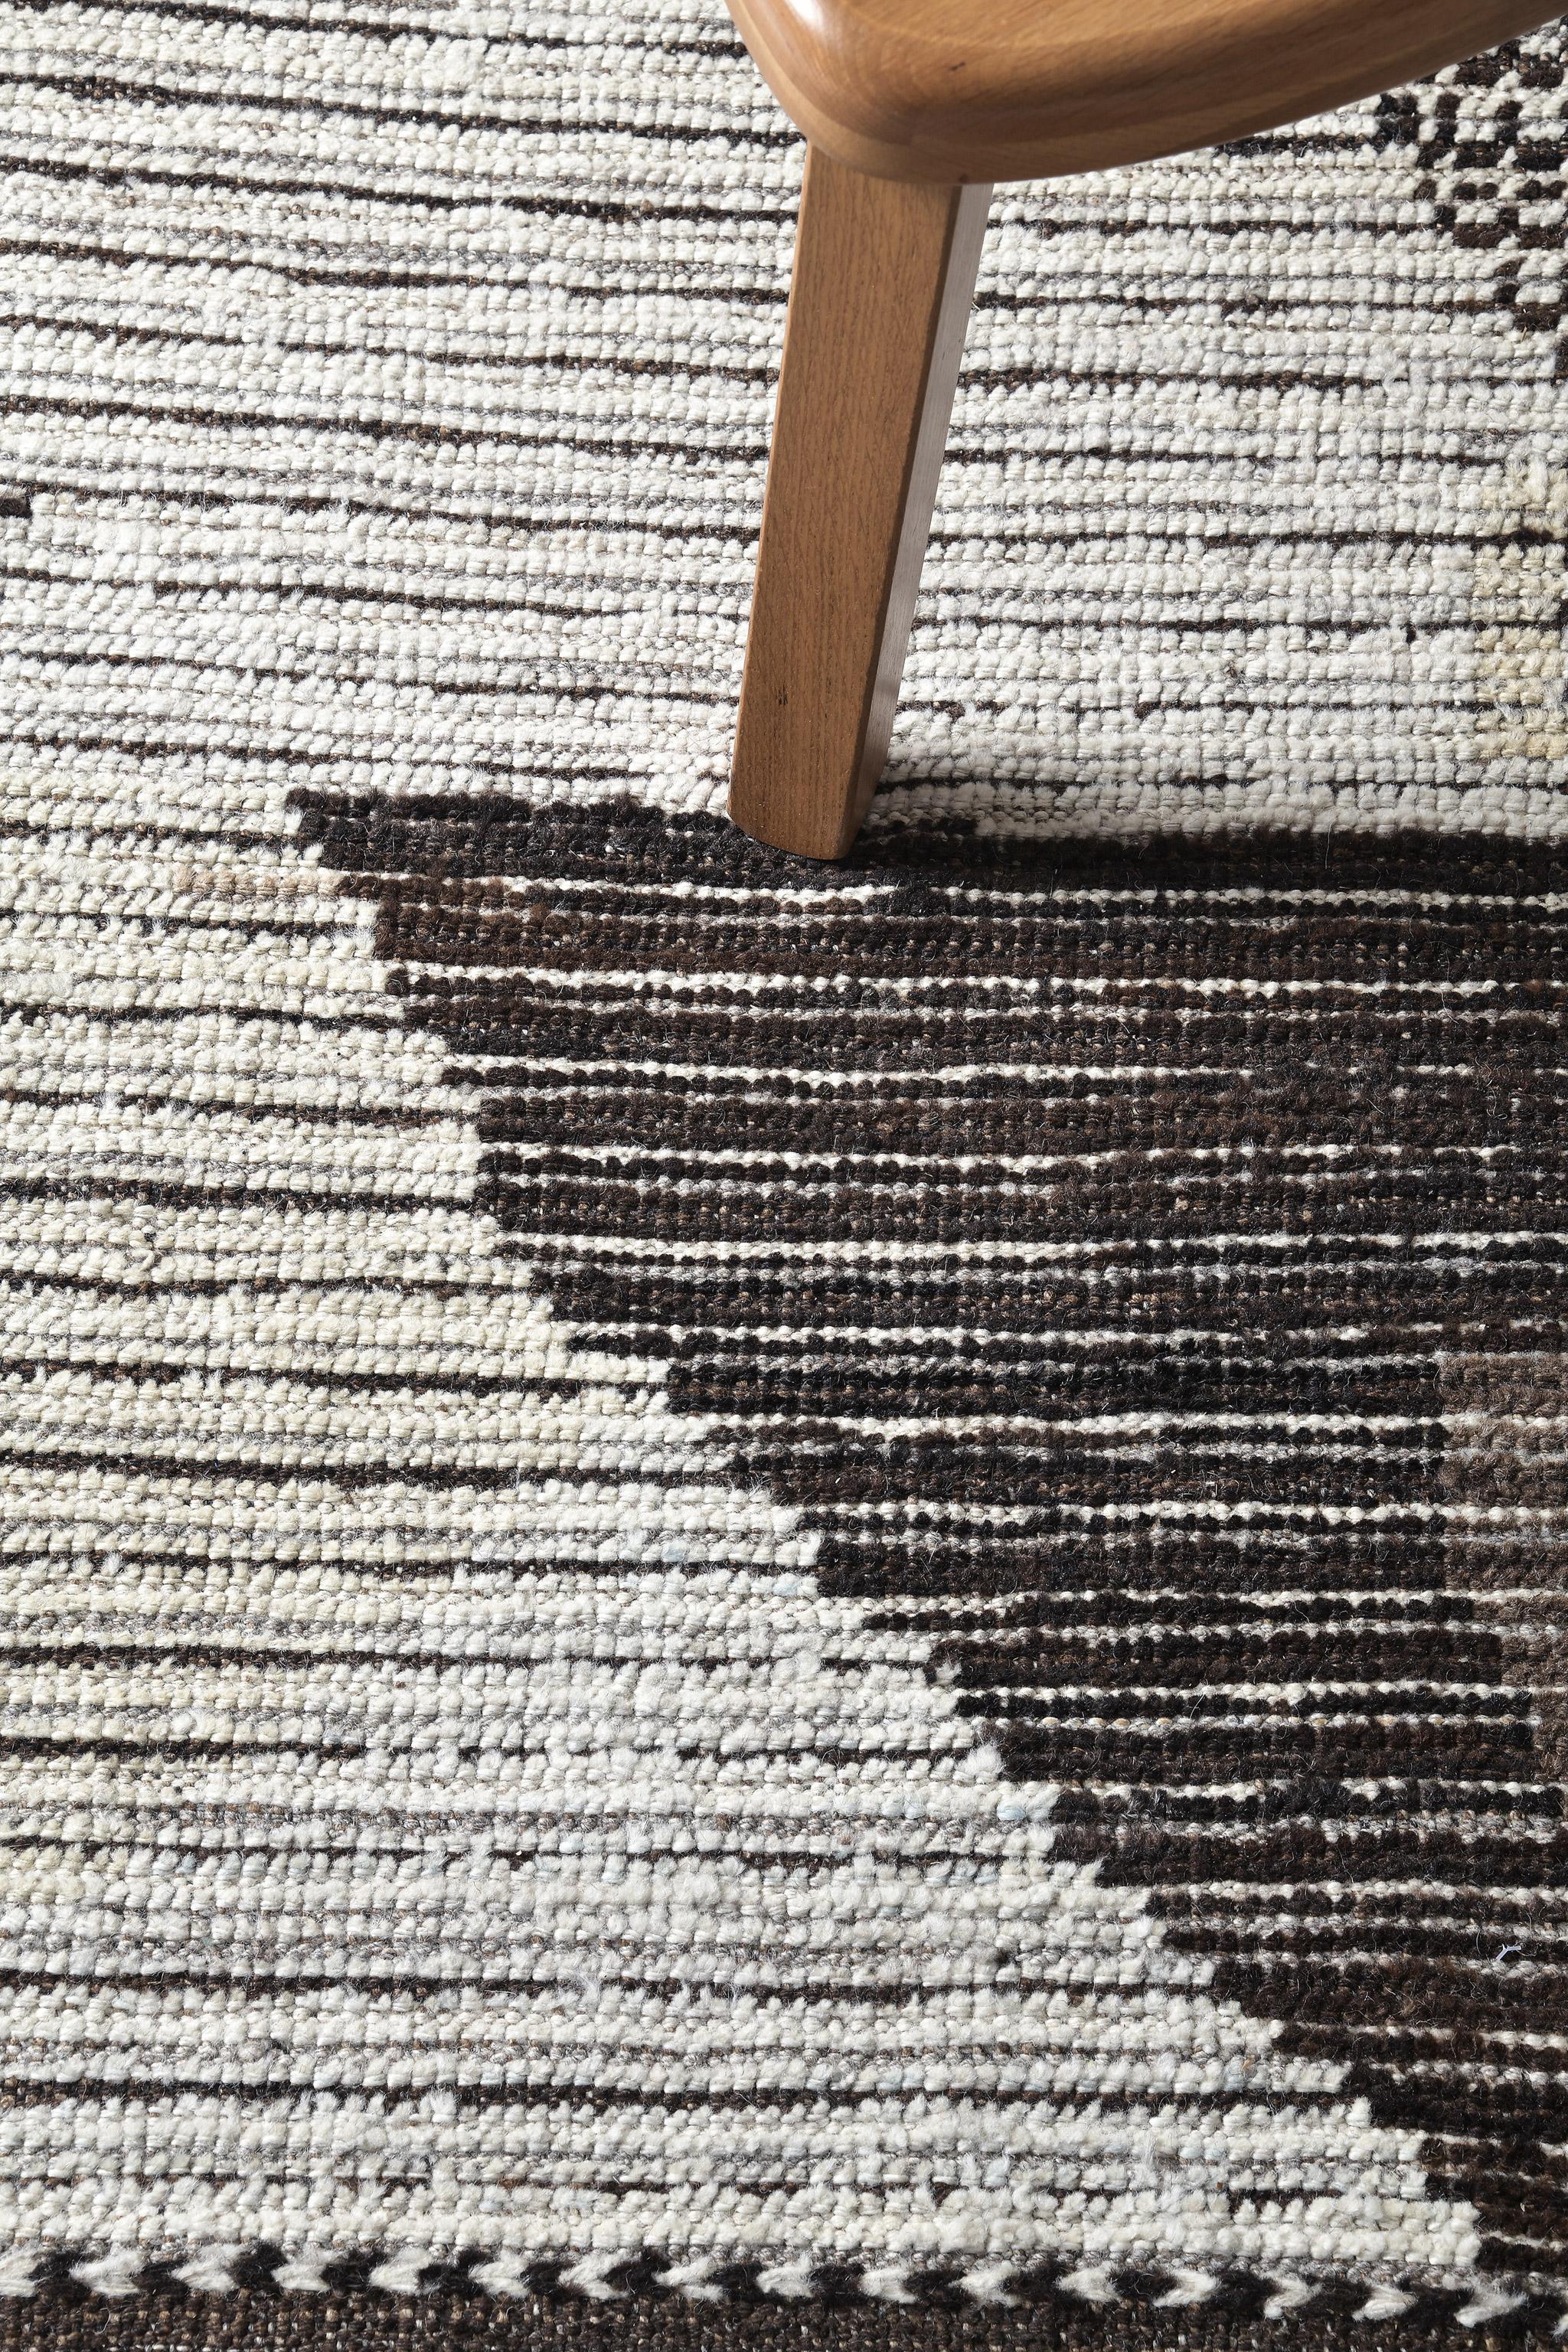 Kaouki' is made of luxurious wool and is made of timeless design elements. Its weaving of natural earth tones with mesmerizing colors and unique design patterns and shapes is what makes the Atlas Collection so unique and sought after. Mehraban's